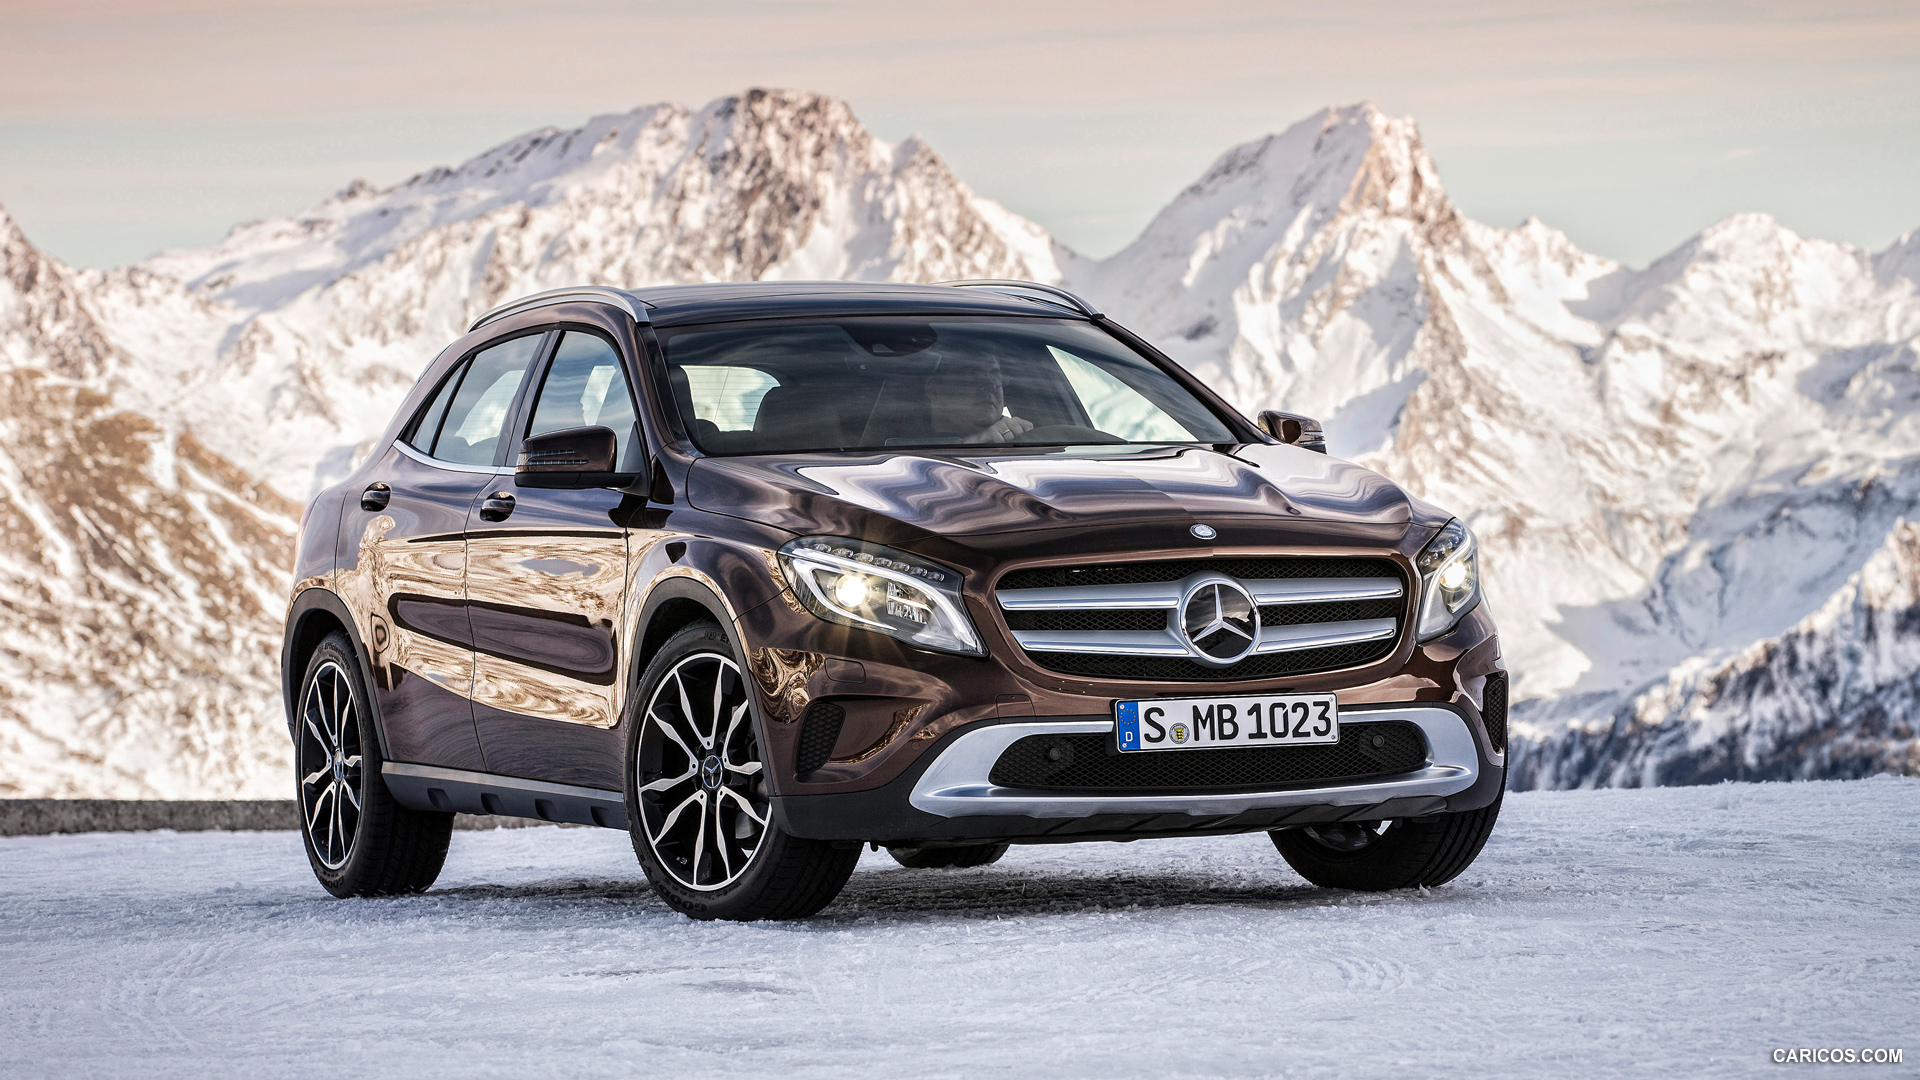 2015 Mercedes-Benz GLA 220 CDI 4MATIC - In Snow - Front, #71 of 71